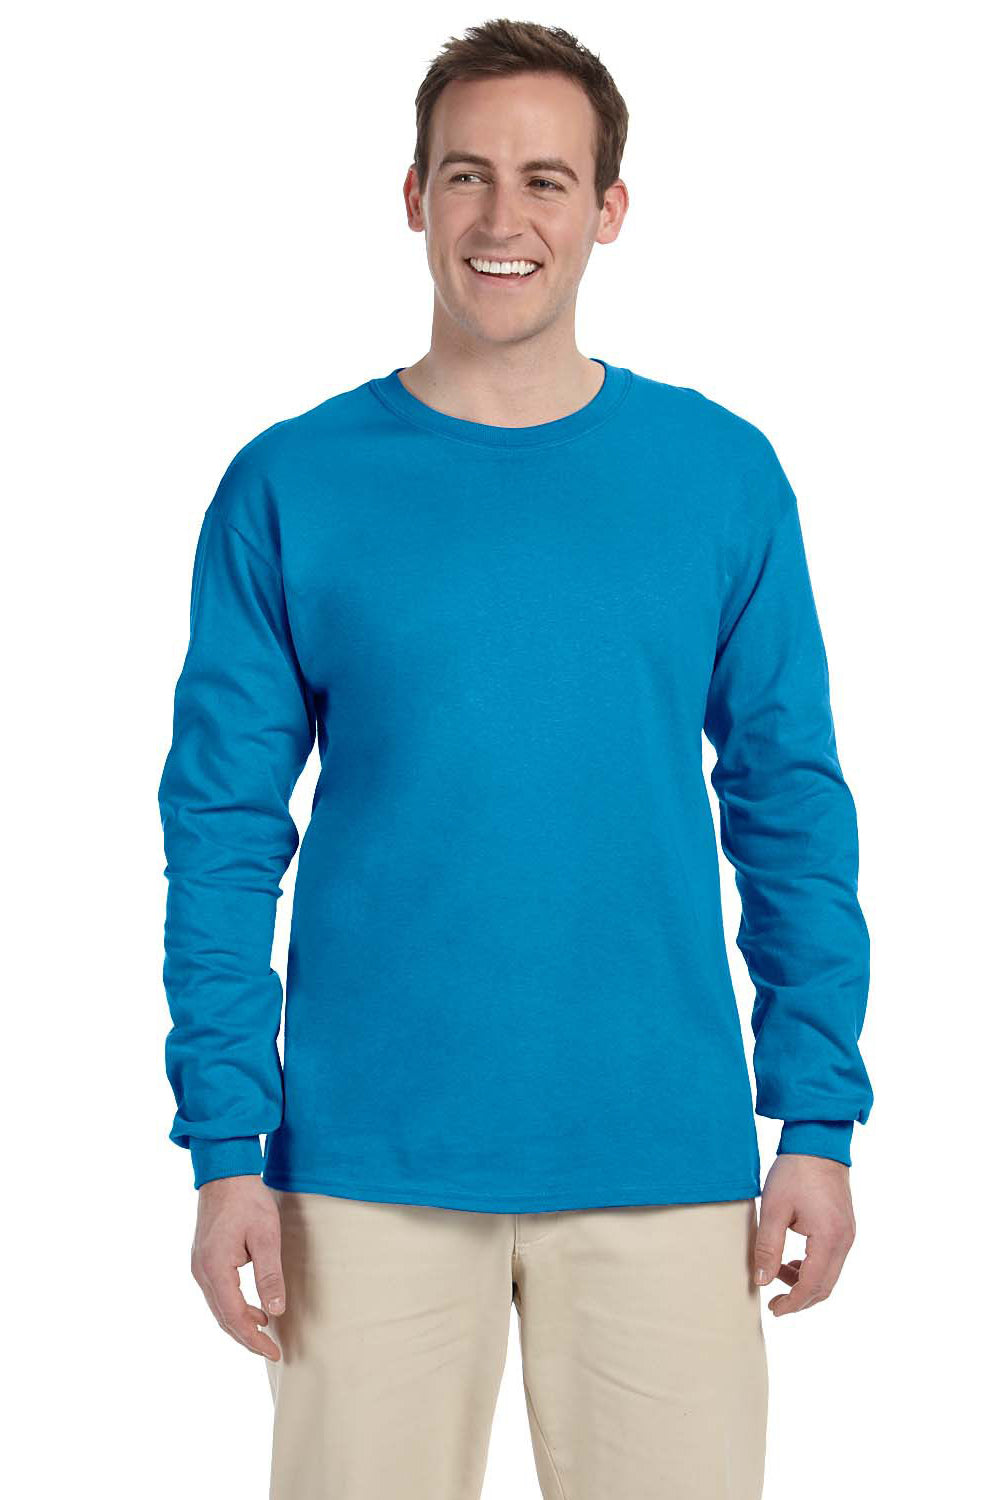 Fruit Of The Loom 4930 Mens HD Jersey Long Sleeve Crewneck T-Shirt Pacific Blue Front